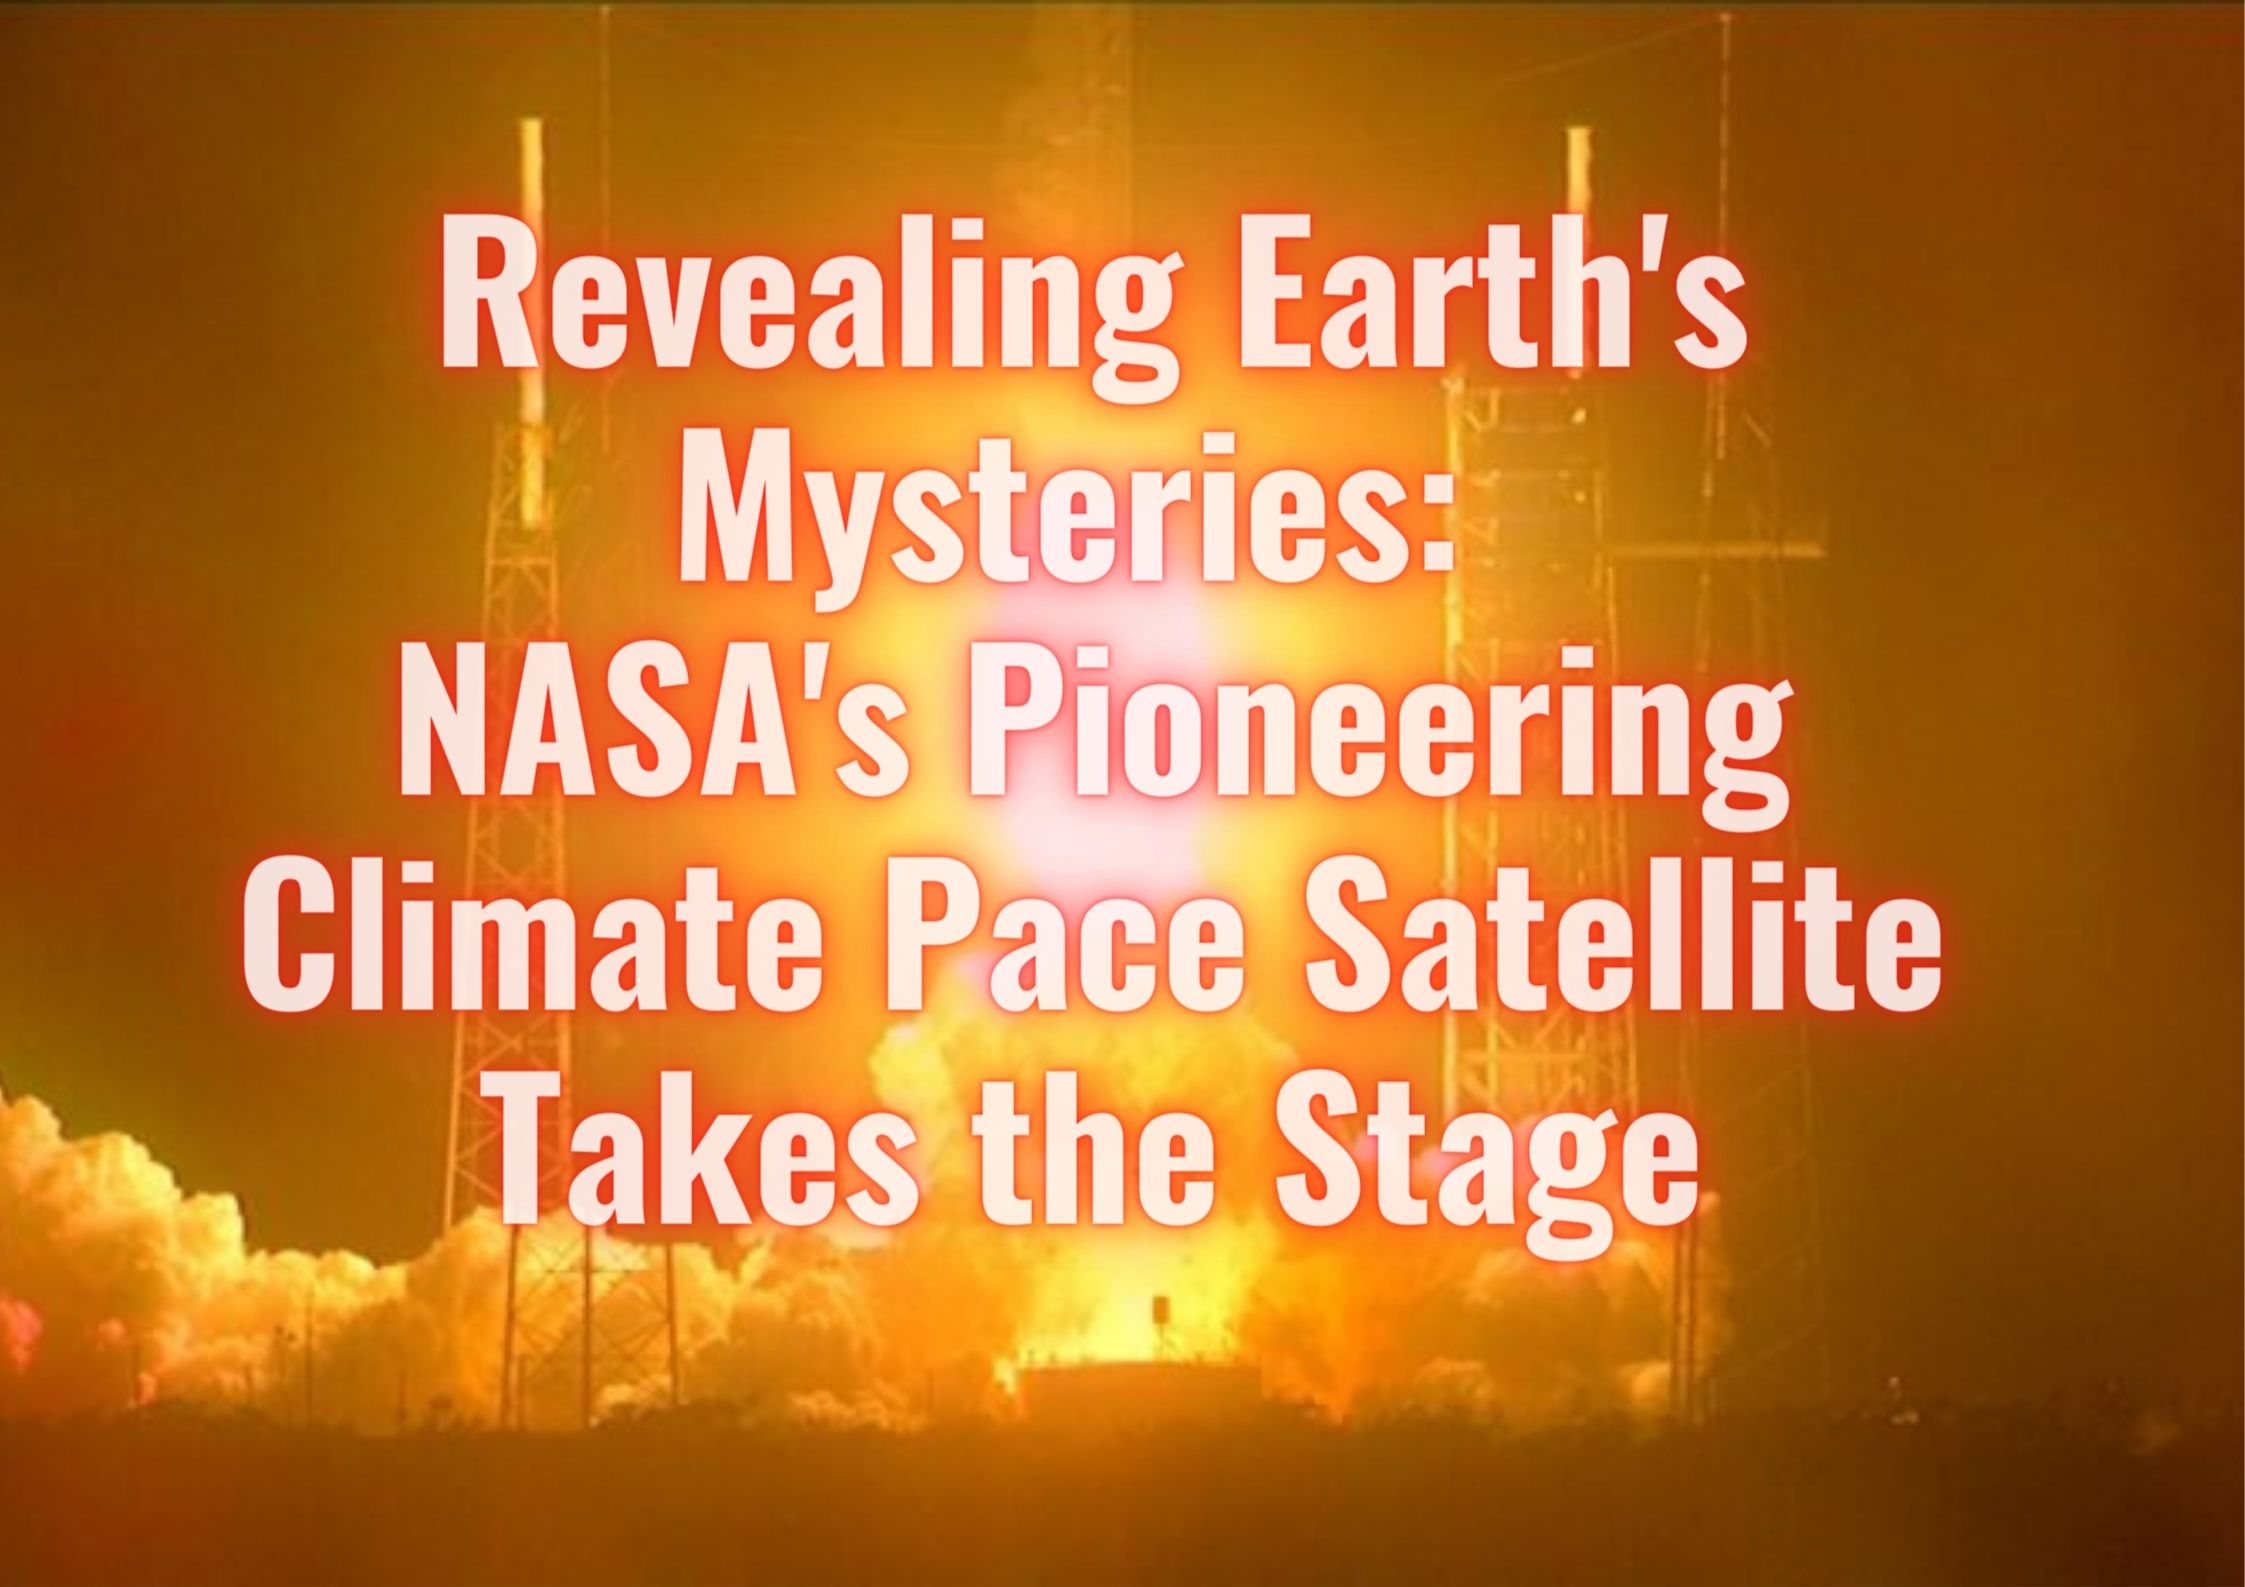 Revealing Earth's Mysteries: NASA's Pioneering Climate Pace Satellite Takes the Stage